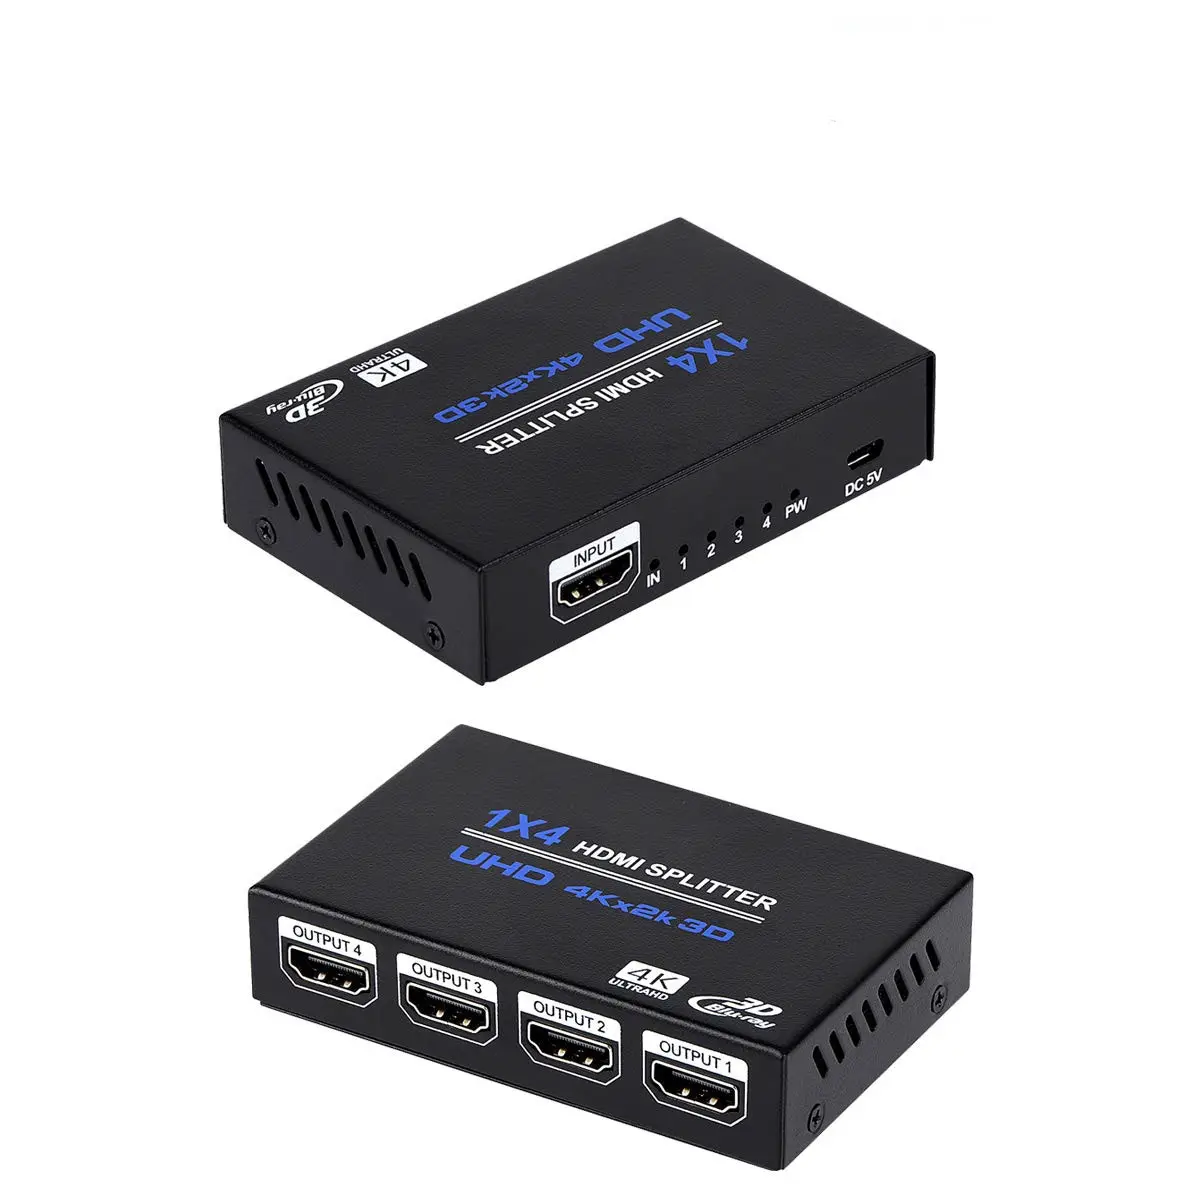 4K HDMI Splitter 1 in 4 Out Audio Video Distributor Box Support 3D Compatible for HDTV, STB, DVD, PS3, Projector